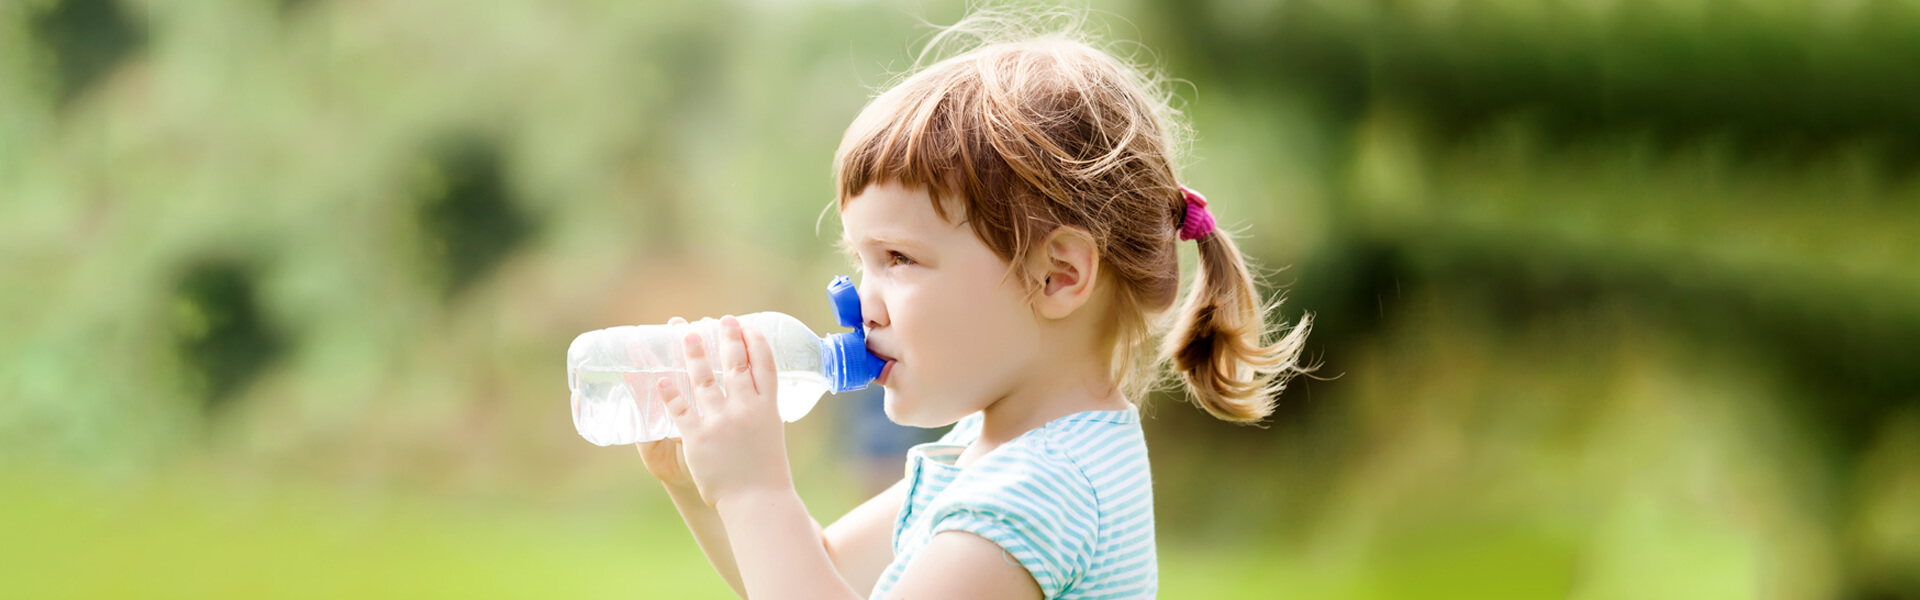 Dehydration in Children - Symptoms, Causes, and Treatment